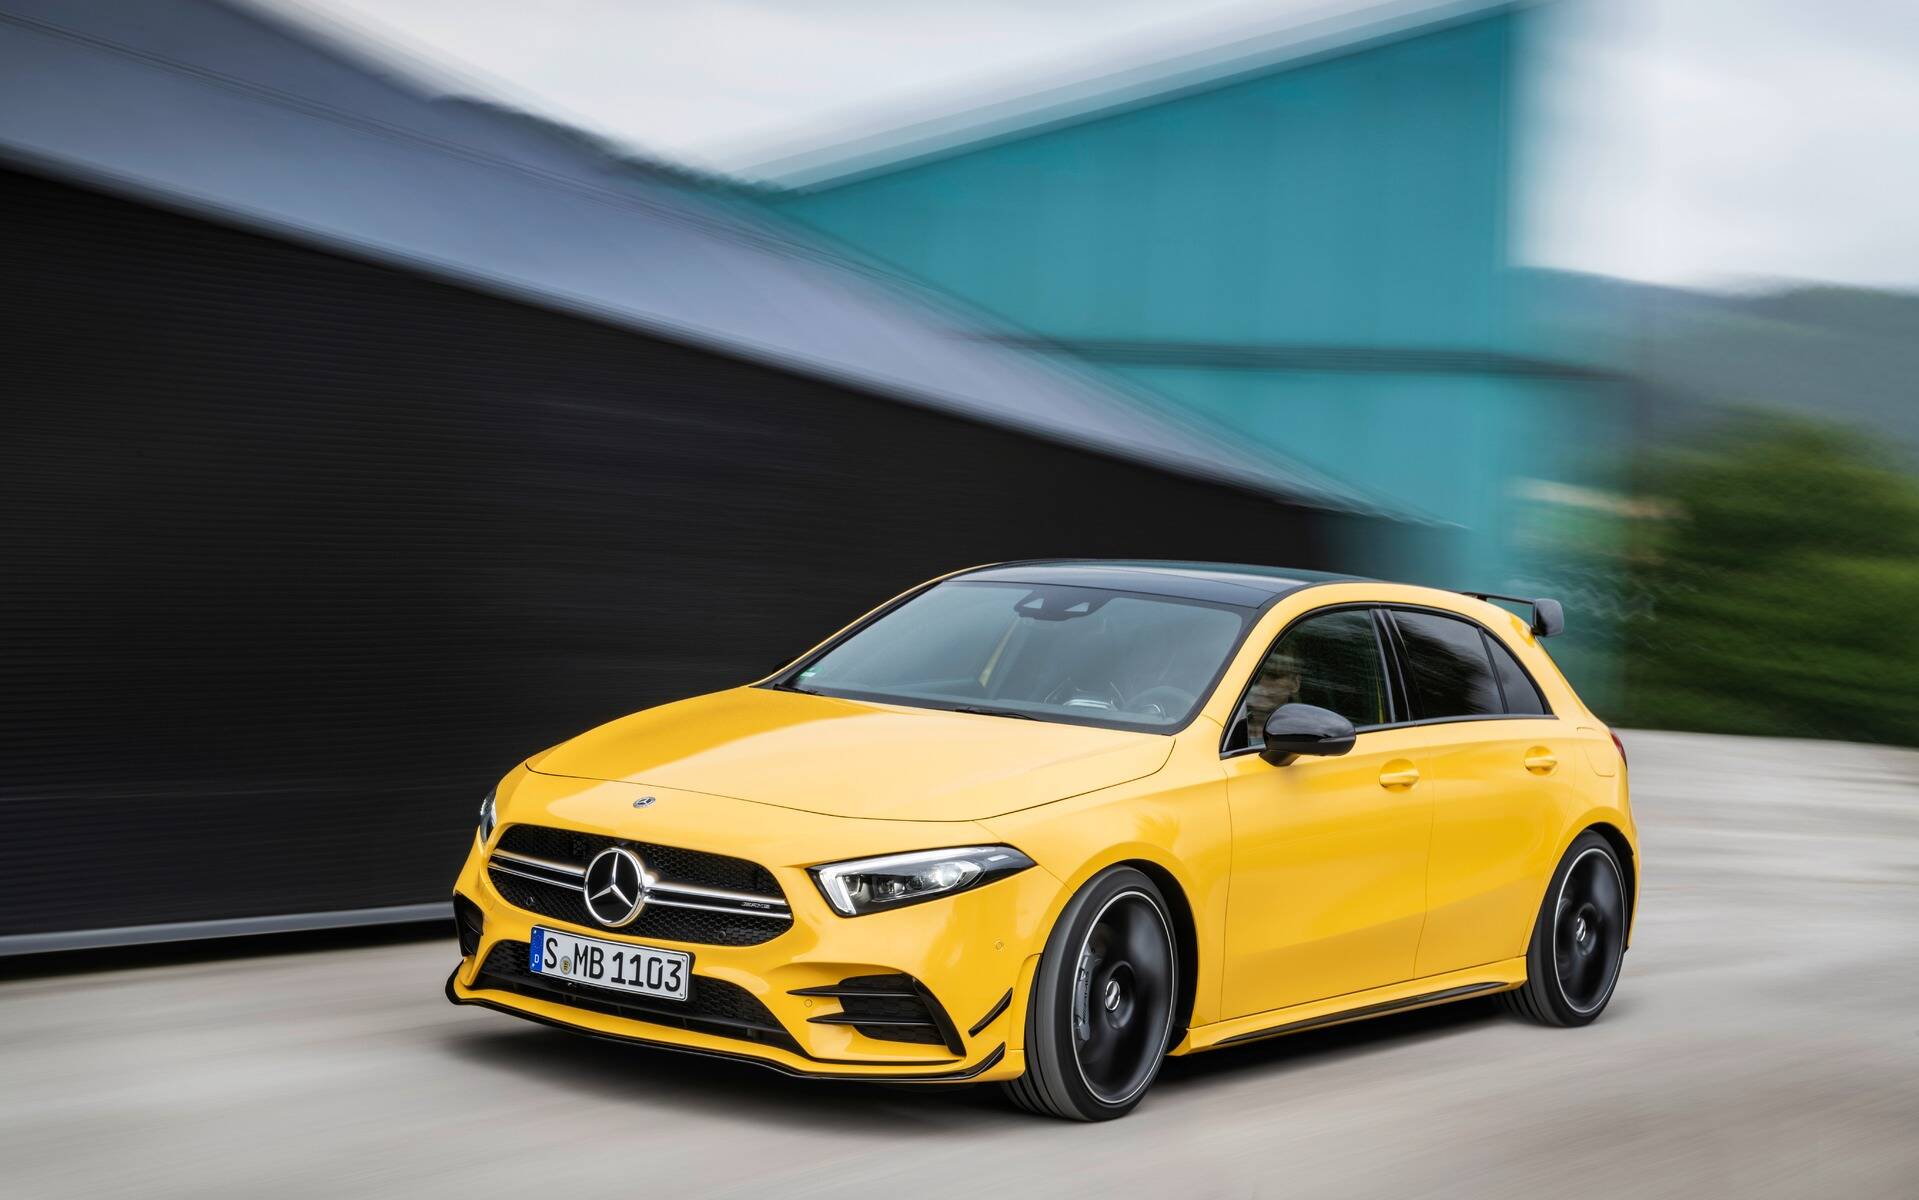 21 Mercedes Benz A Class News Reviews Picture Galleries And Videos The Car Guide